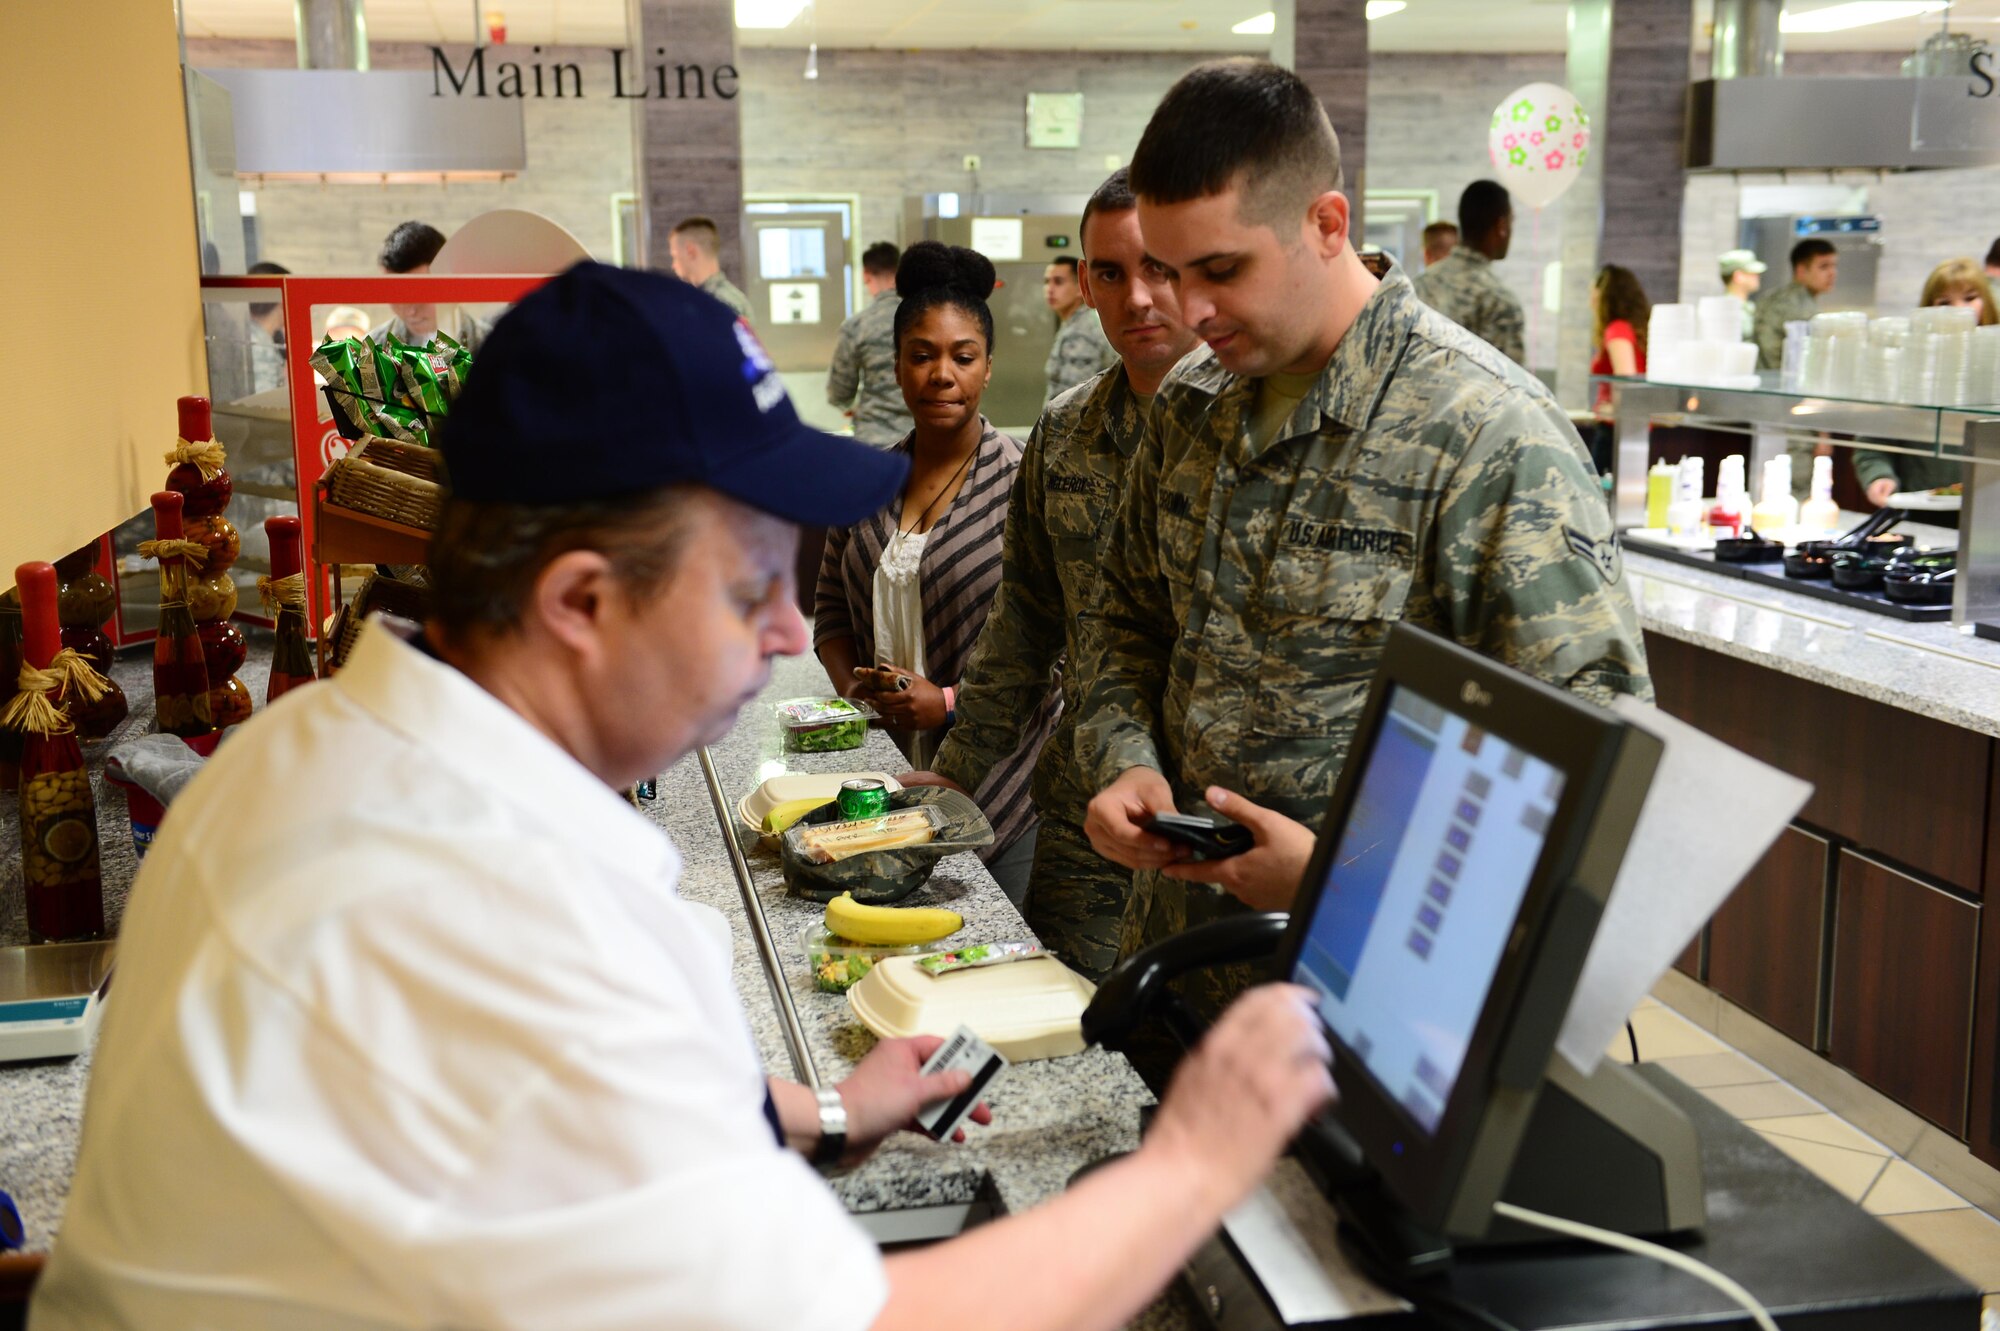 Airmen pay for their first lunch at the updated Dining Facility at Spangdahlem Air Base after several months of renovations that made meal service unavailable to the Saber community, April 10, 2017. Upgrades to the DFAC include new kitchen equipment like ovens and a walk in fridge, air conditioning installed in the kitchen, a new service line, repainting the walls and adding murals in the dining rooms to reflect the base's connection to the local community. (U.S. Air Force photo by Senior Airman Joshua R. M. Dewberry)